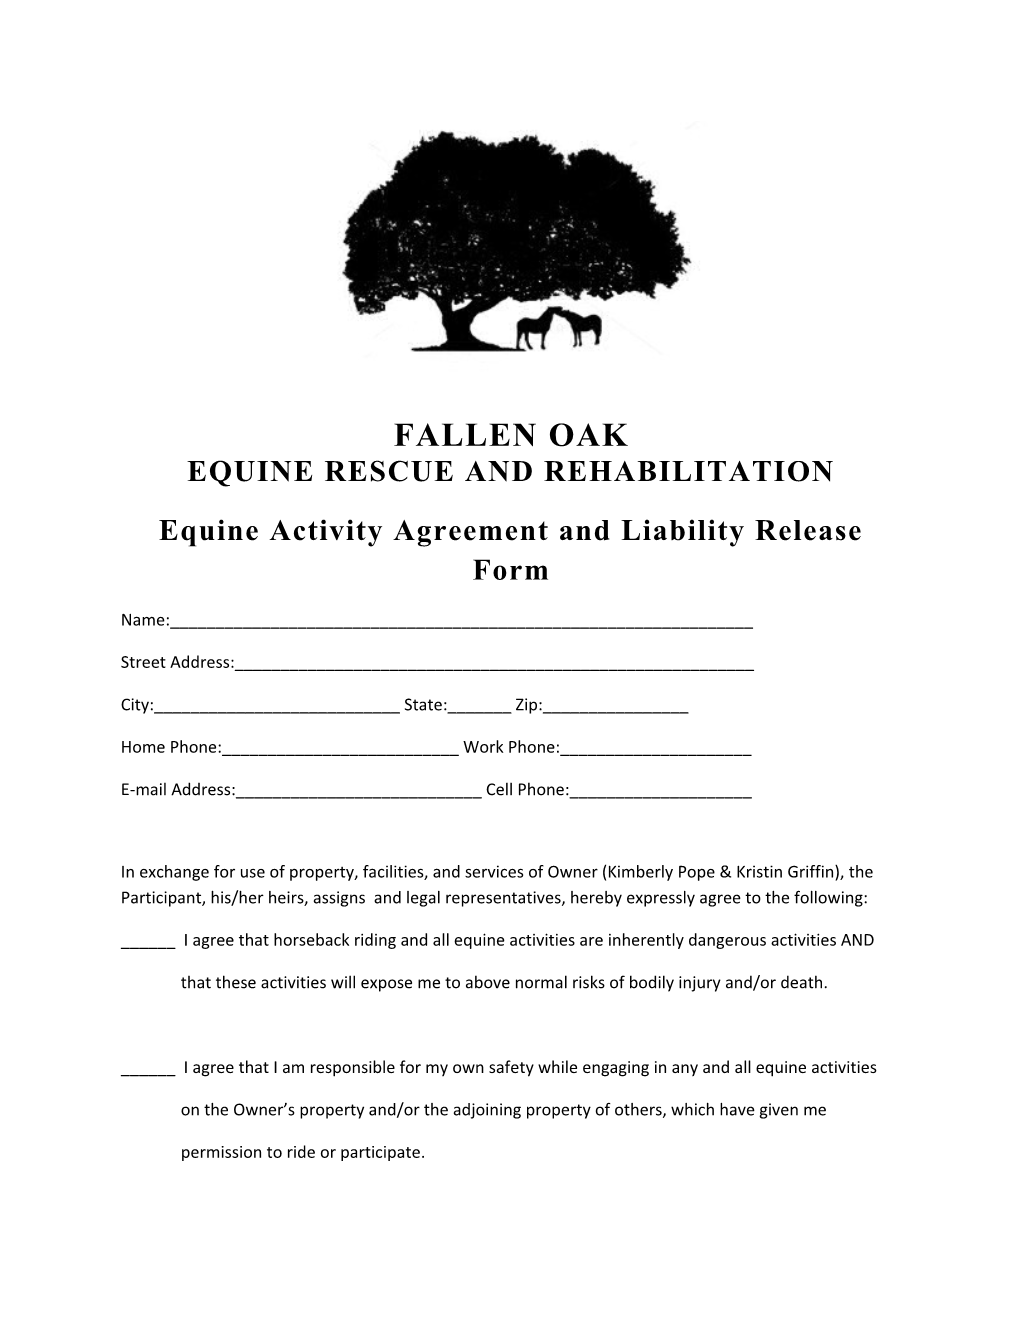 Equine Activity Agreement and Liability Release Form